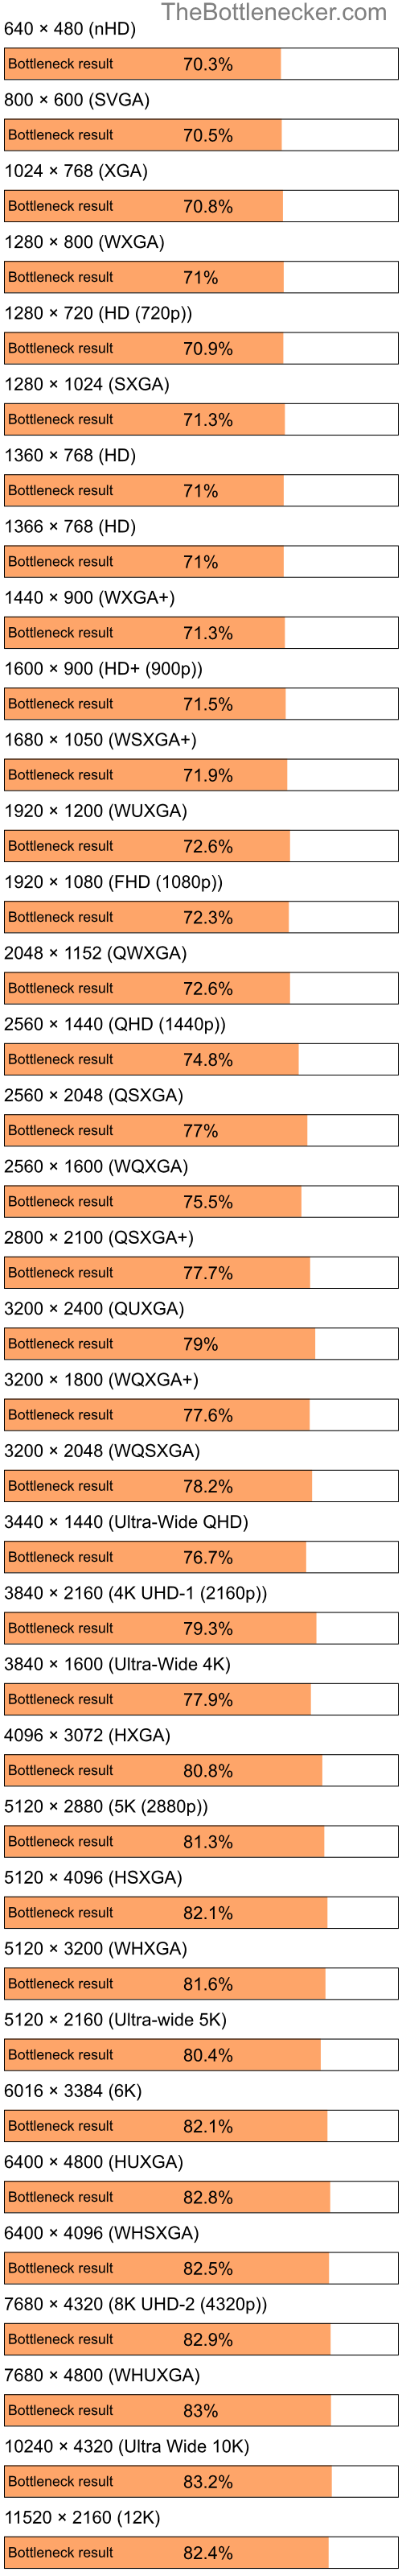 Bottleneck results by resolution for Intel Pentium 4 and NVIDIA GeForce 9300 GE in Graphic Card Intense Tasks